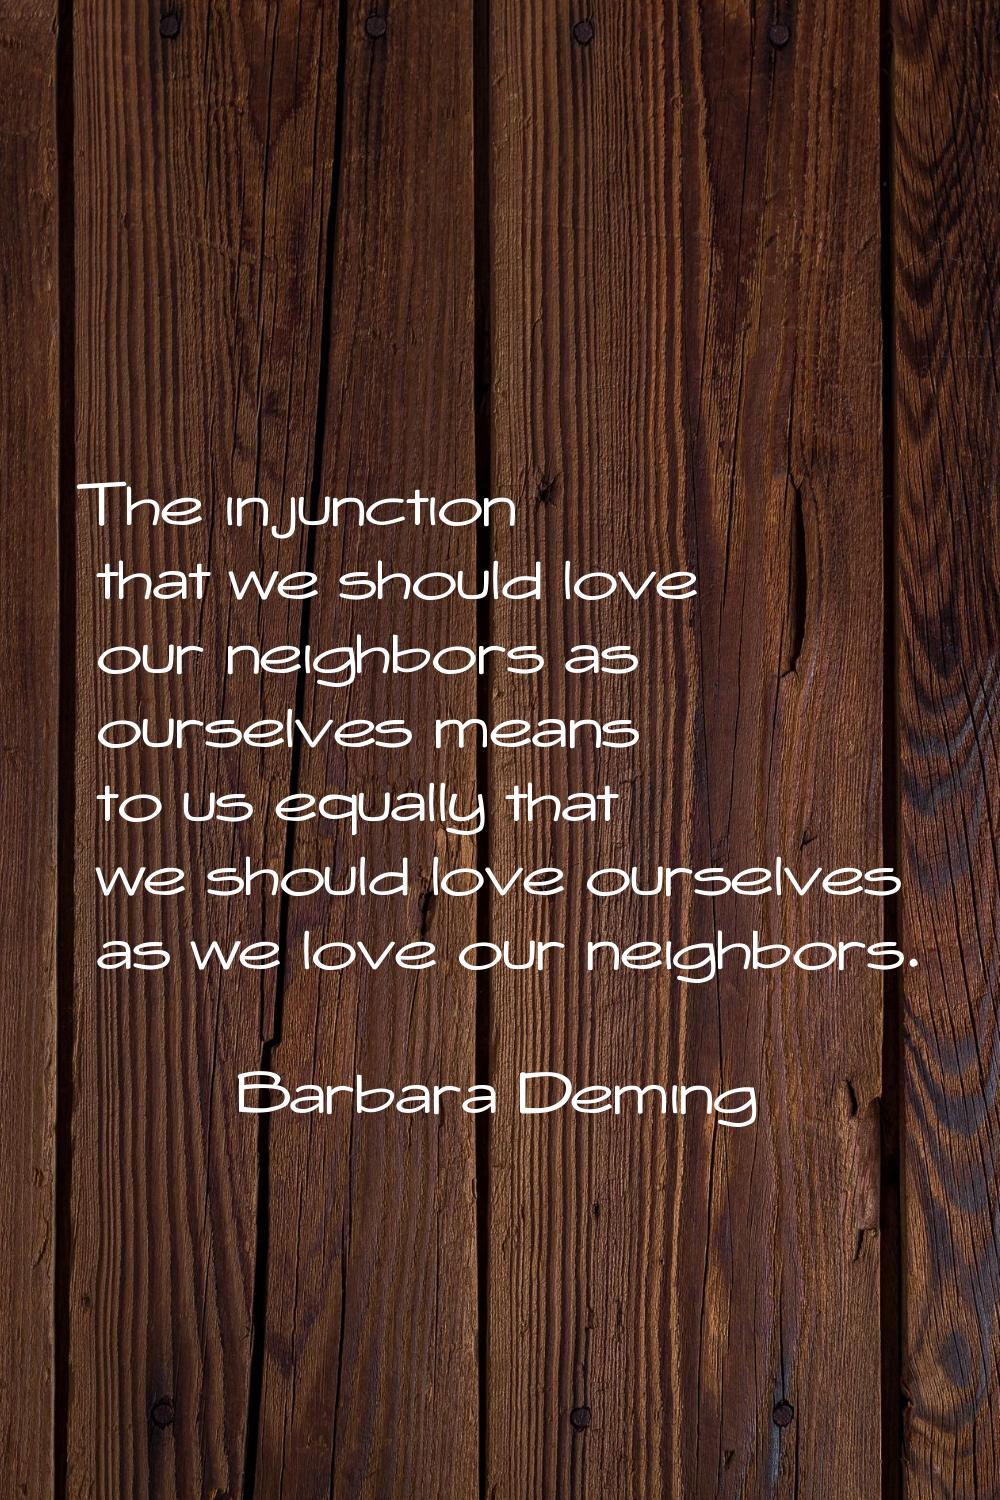 The injunction that we should love our neighbors as ourselves means to us equally that we should lo